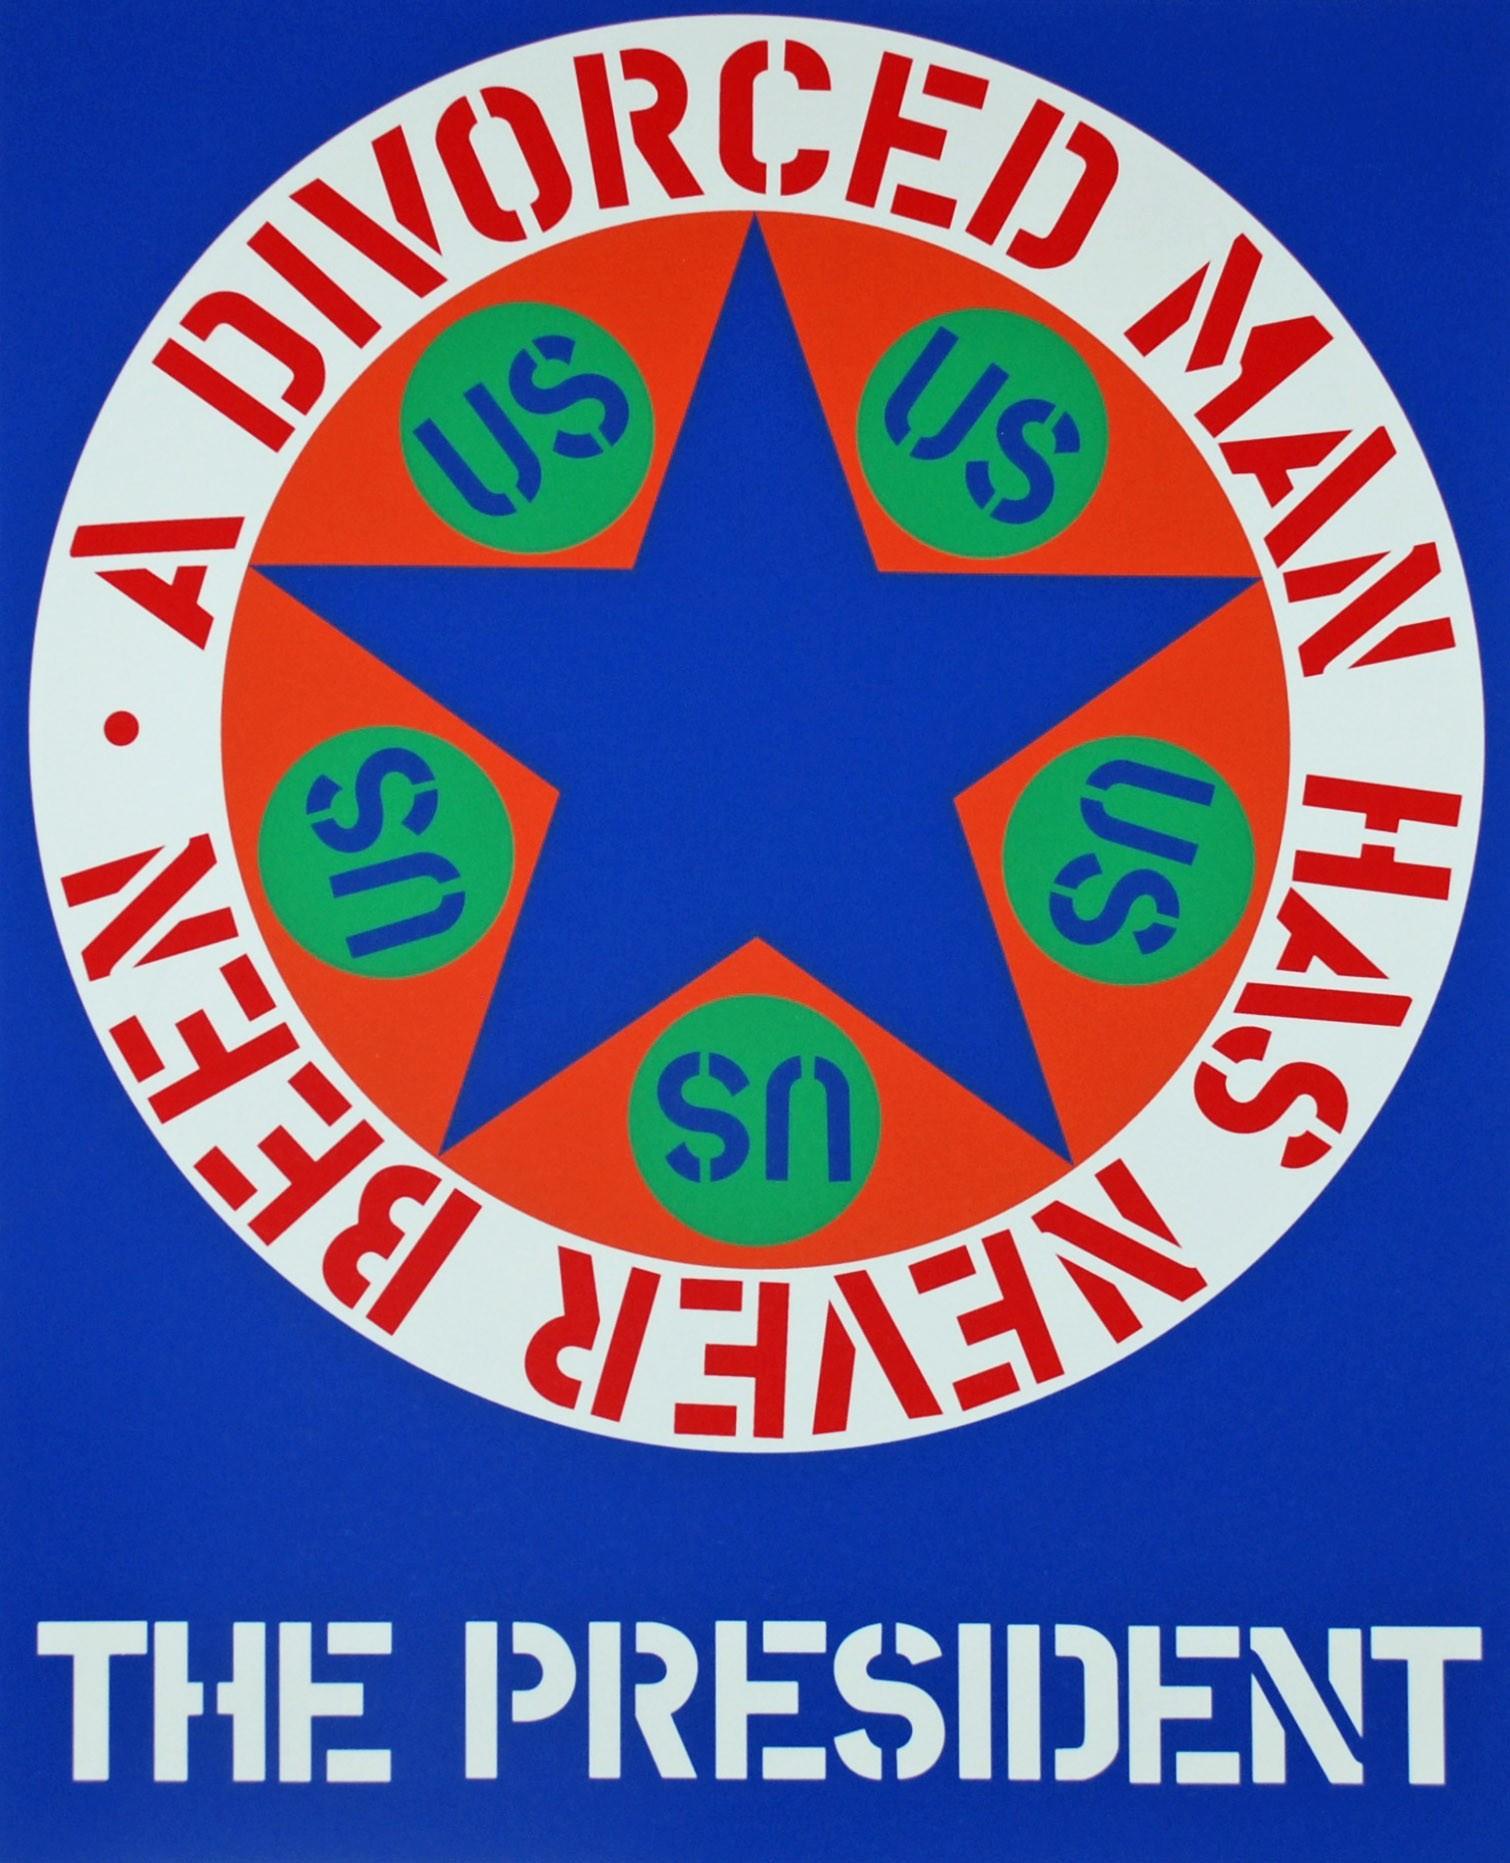 The President - Print by Robert Indiana